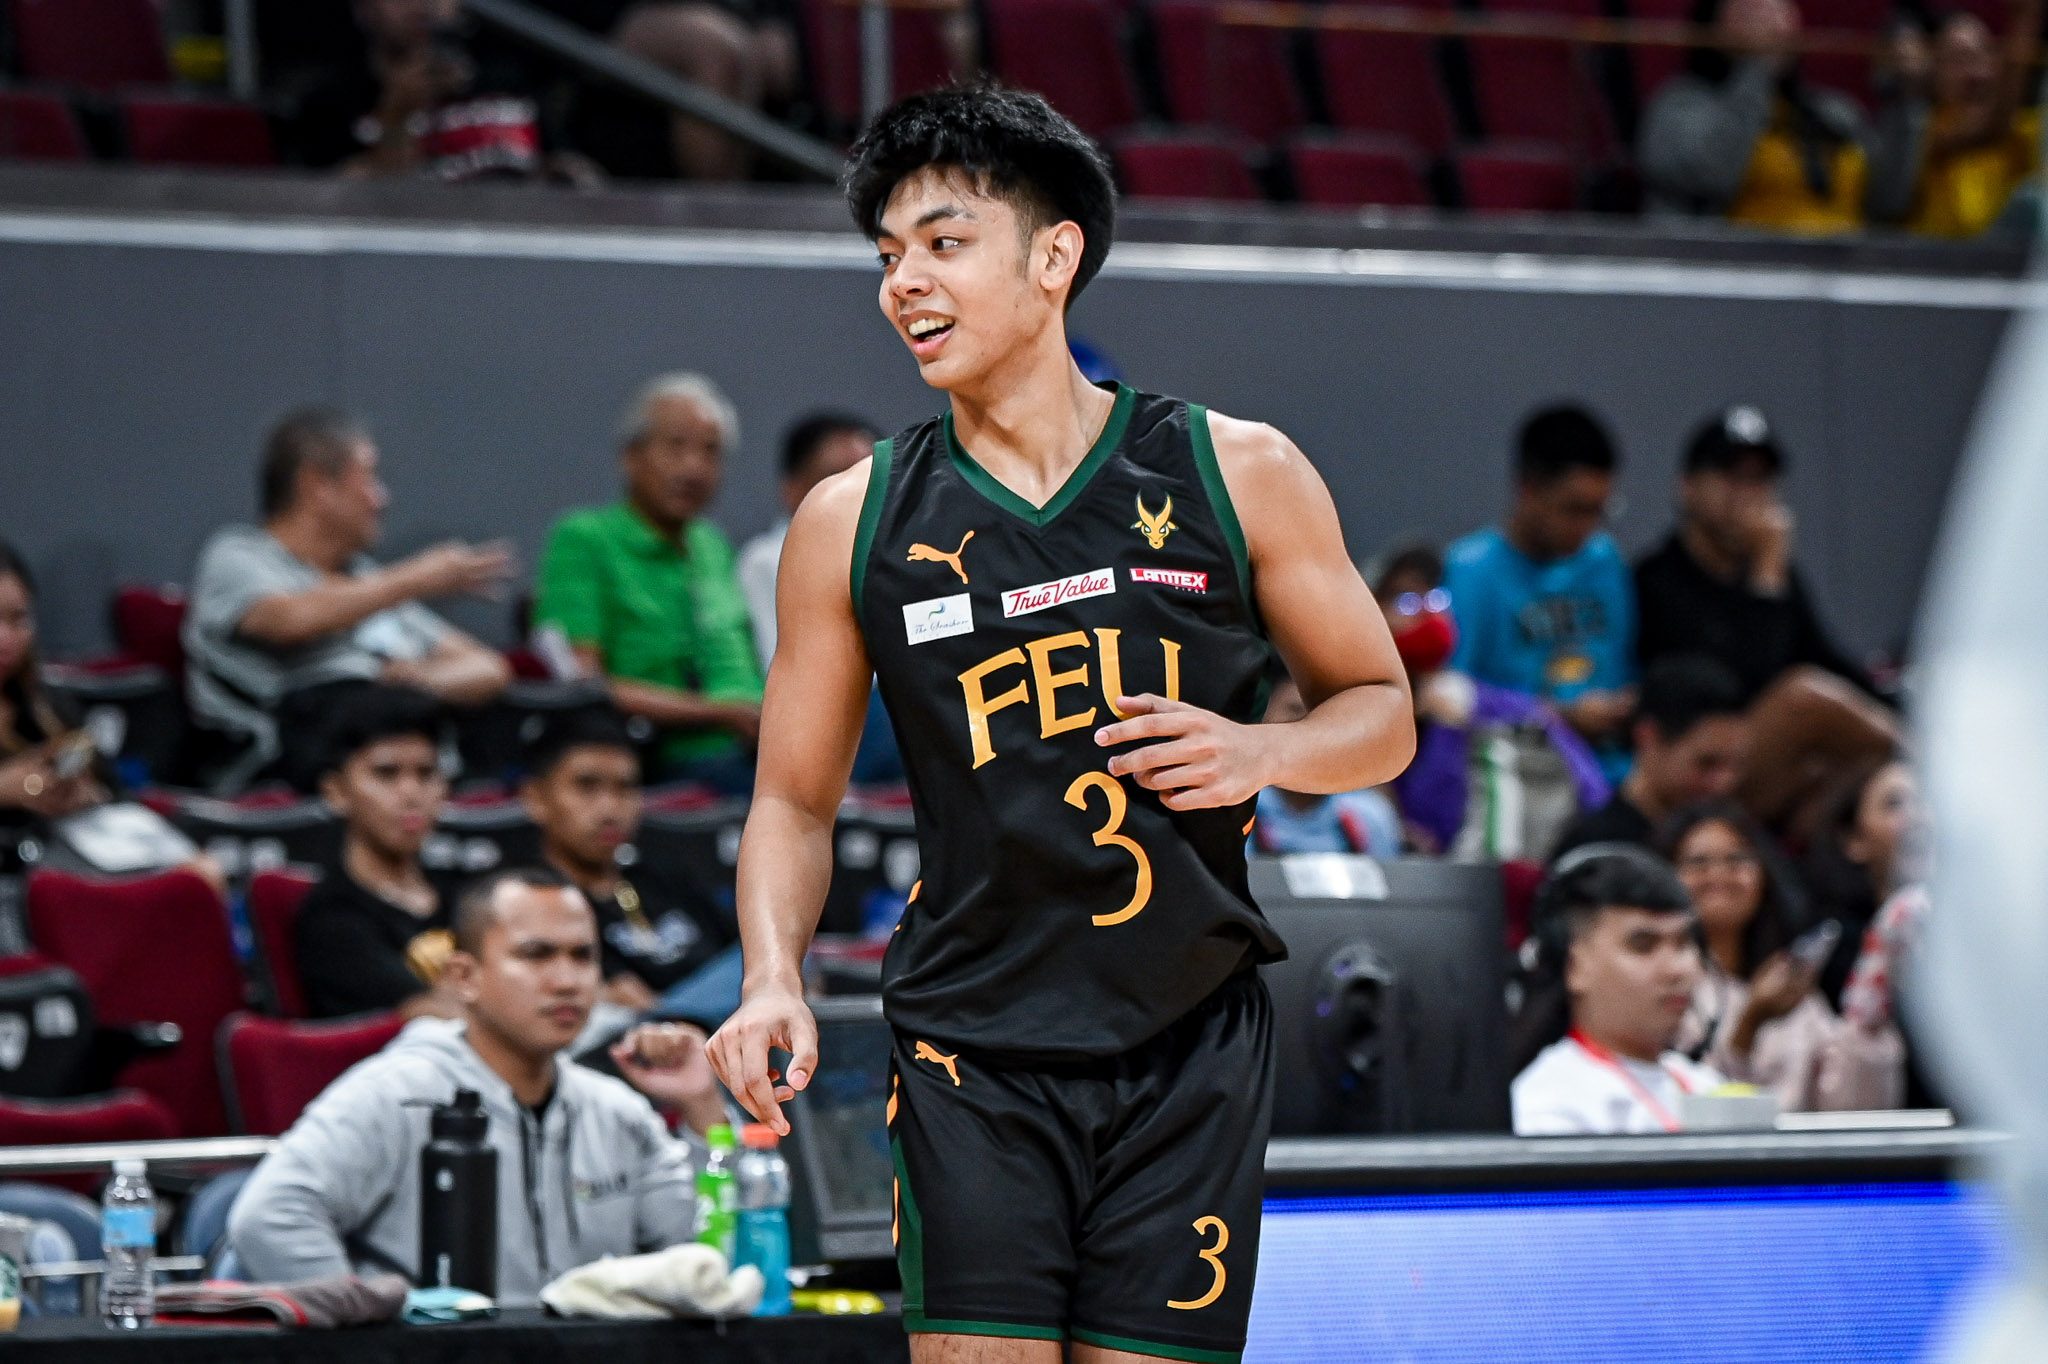 Jorick Bautista raring to lead FEU back to contention after L-Jay Gonzales exit